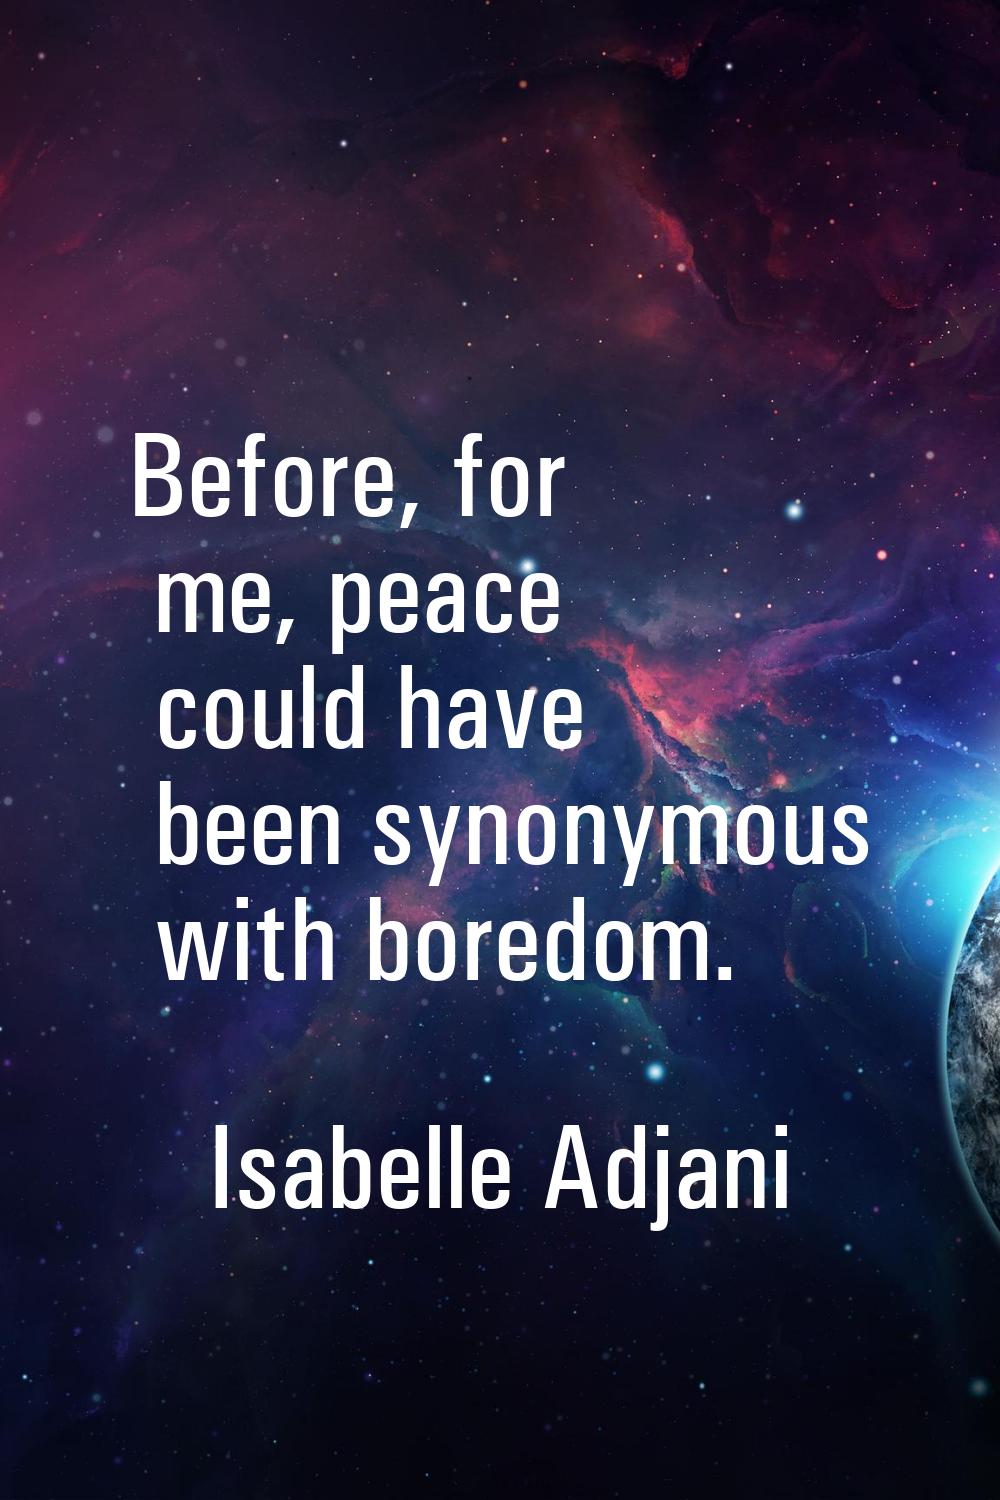 Before, for me, peace could have been synonymous with boredom.